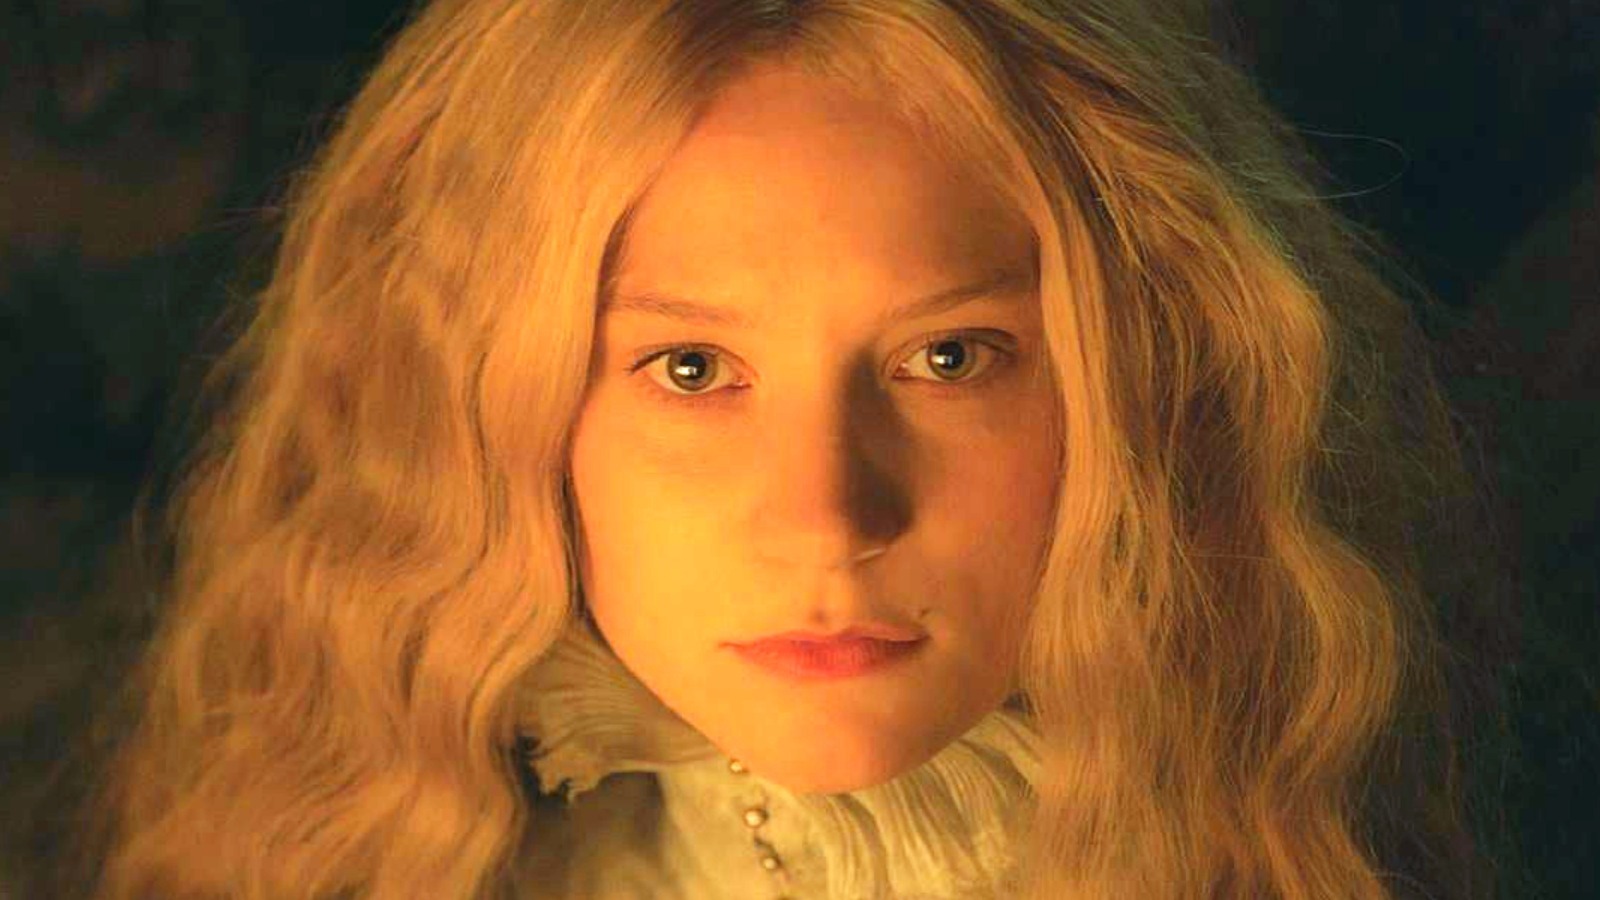 The Movie Like Crimson Peak That Horror Romance Fans Need To See